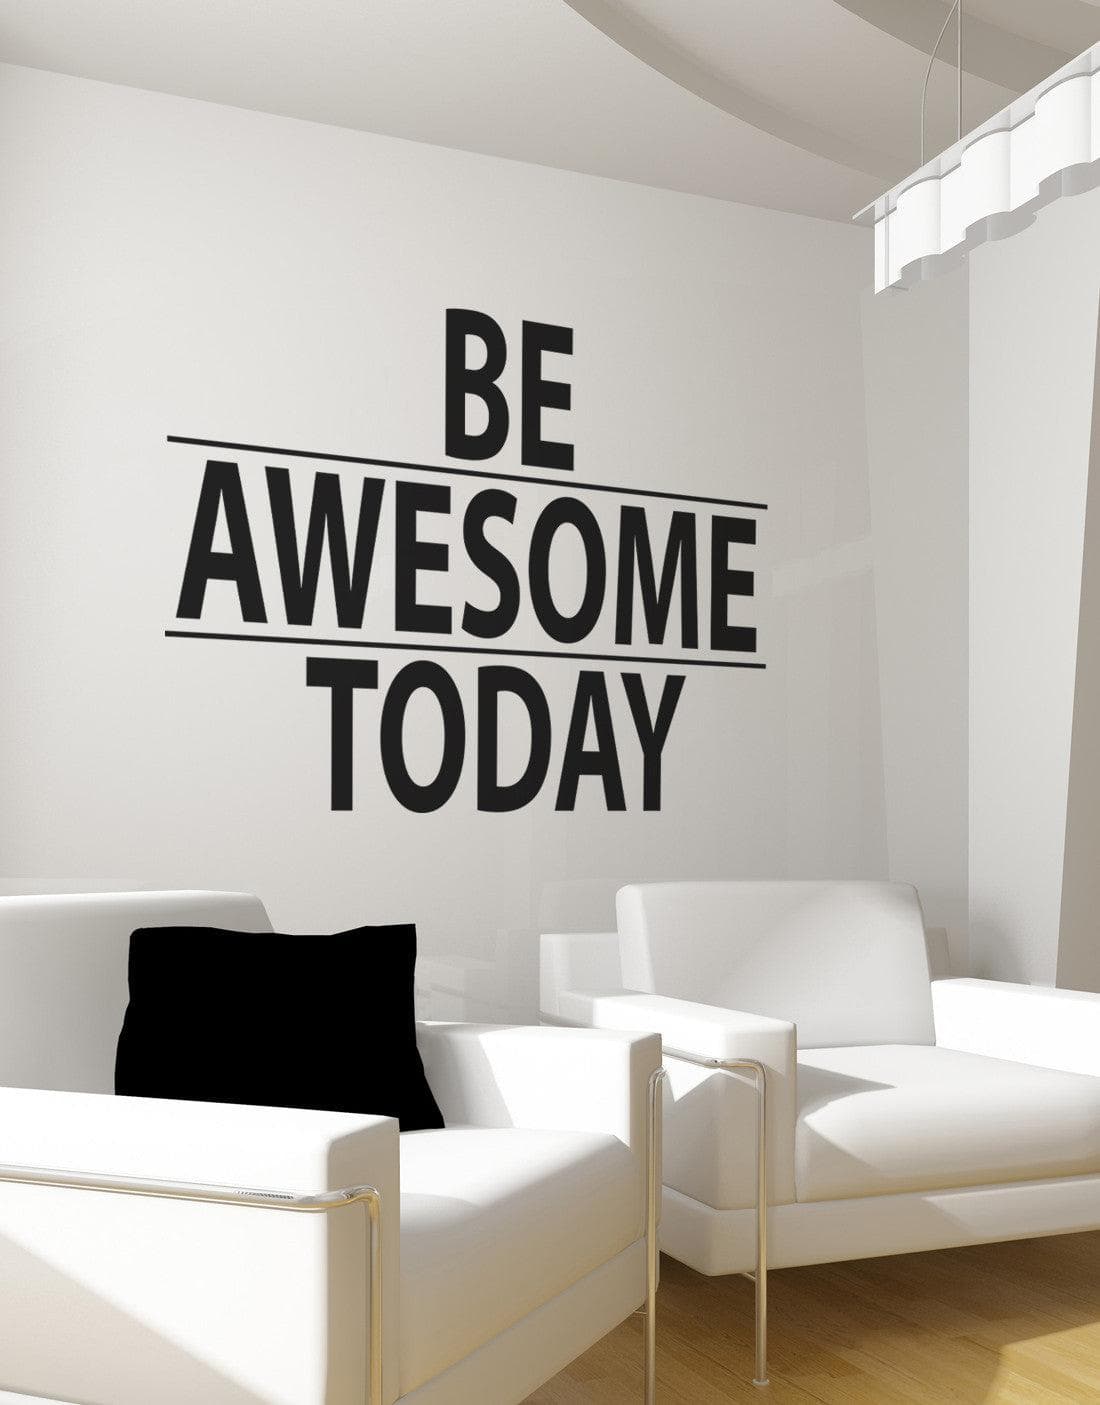 Be Awesome Today Motivational Quote Wall Decal Sticker #6013